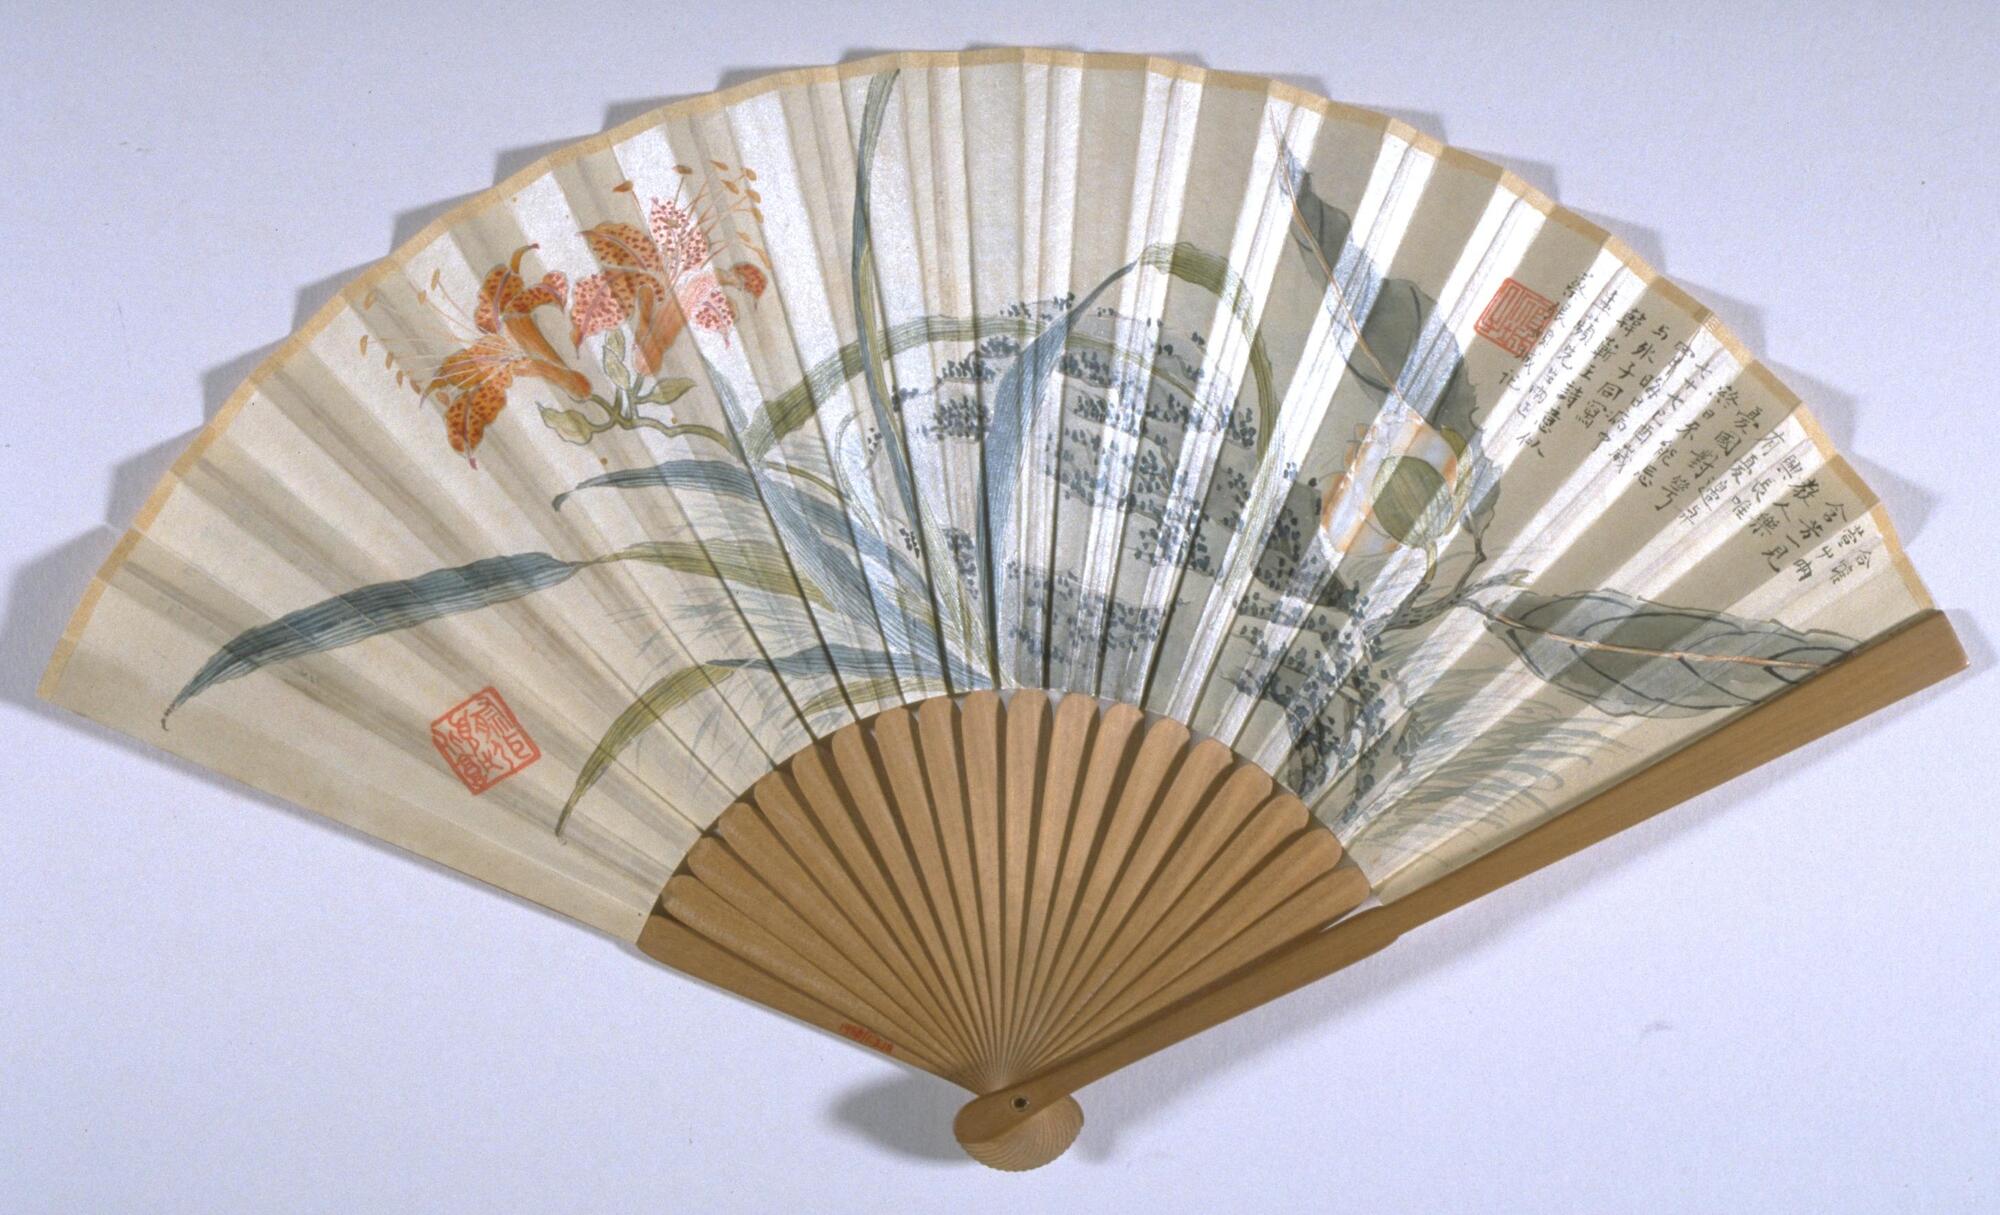 A fan with depictions of chrysanthemums, tiger lilies, and rocks.